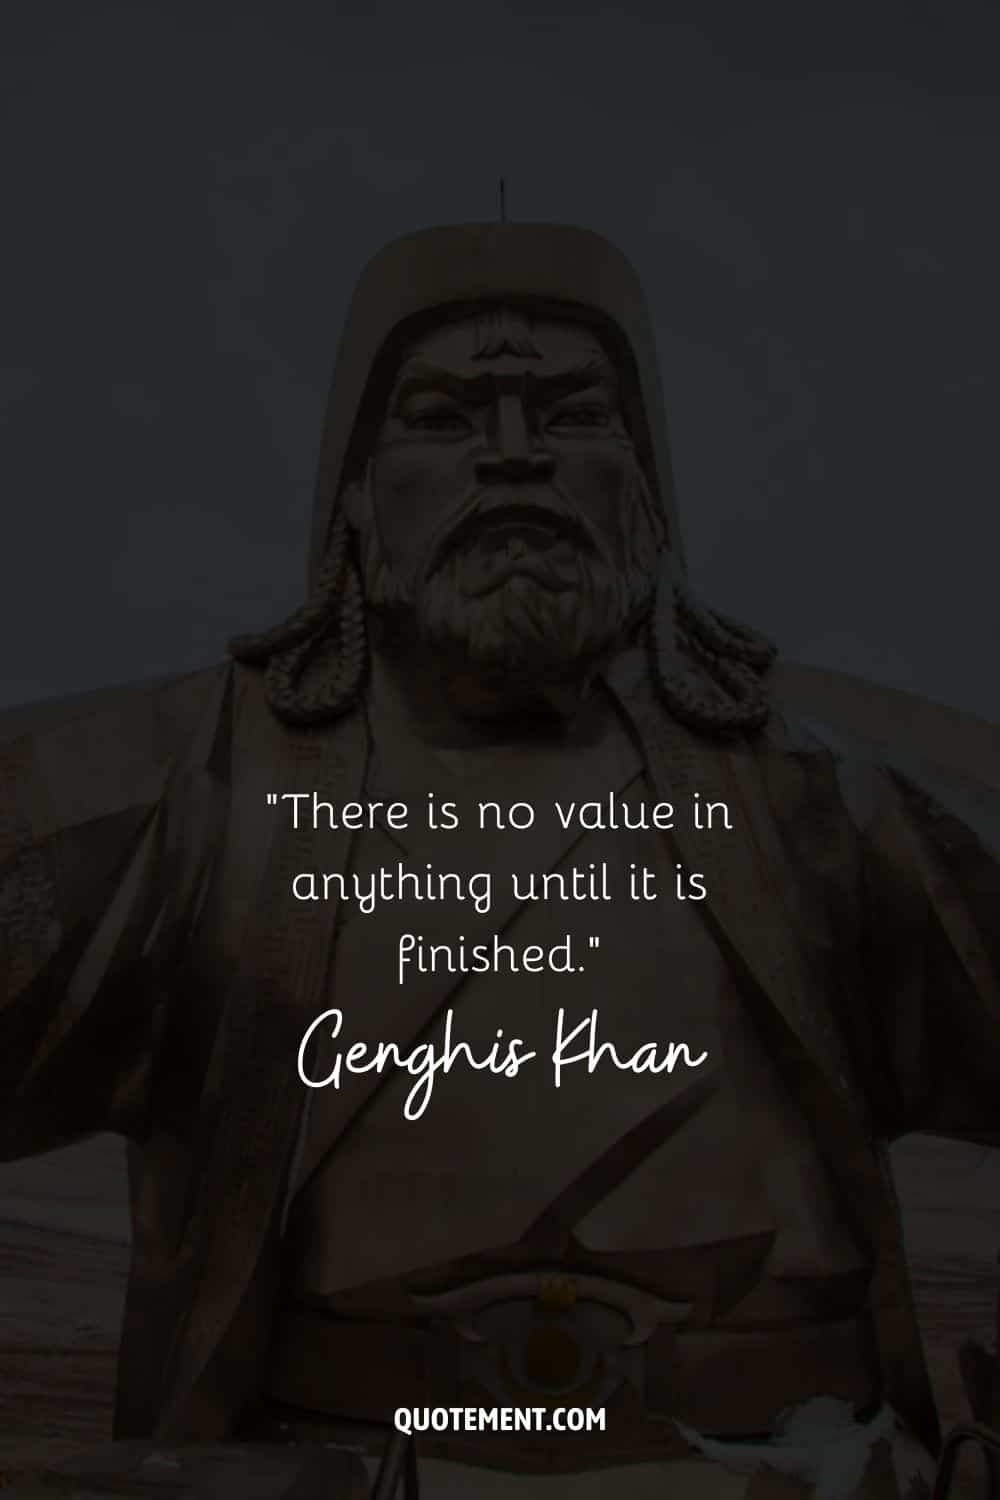 There is no value in anything until it is finished